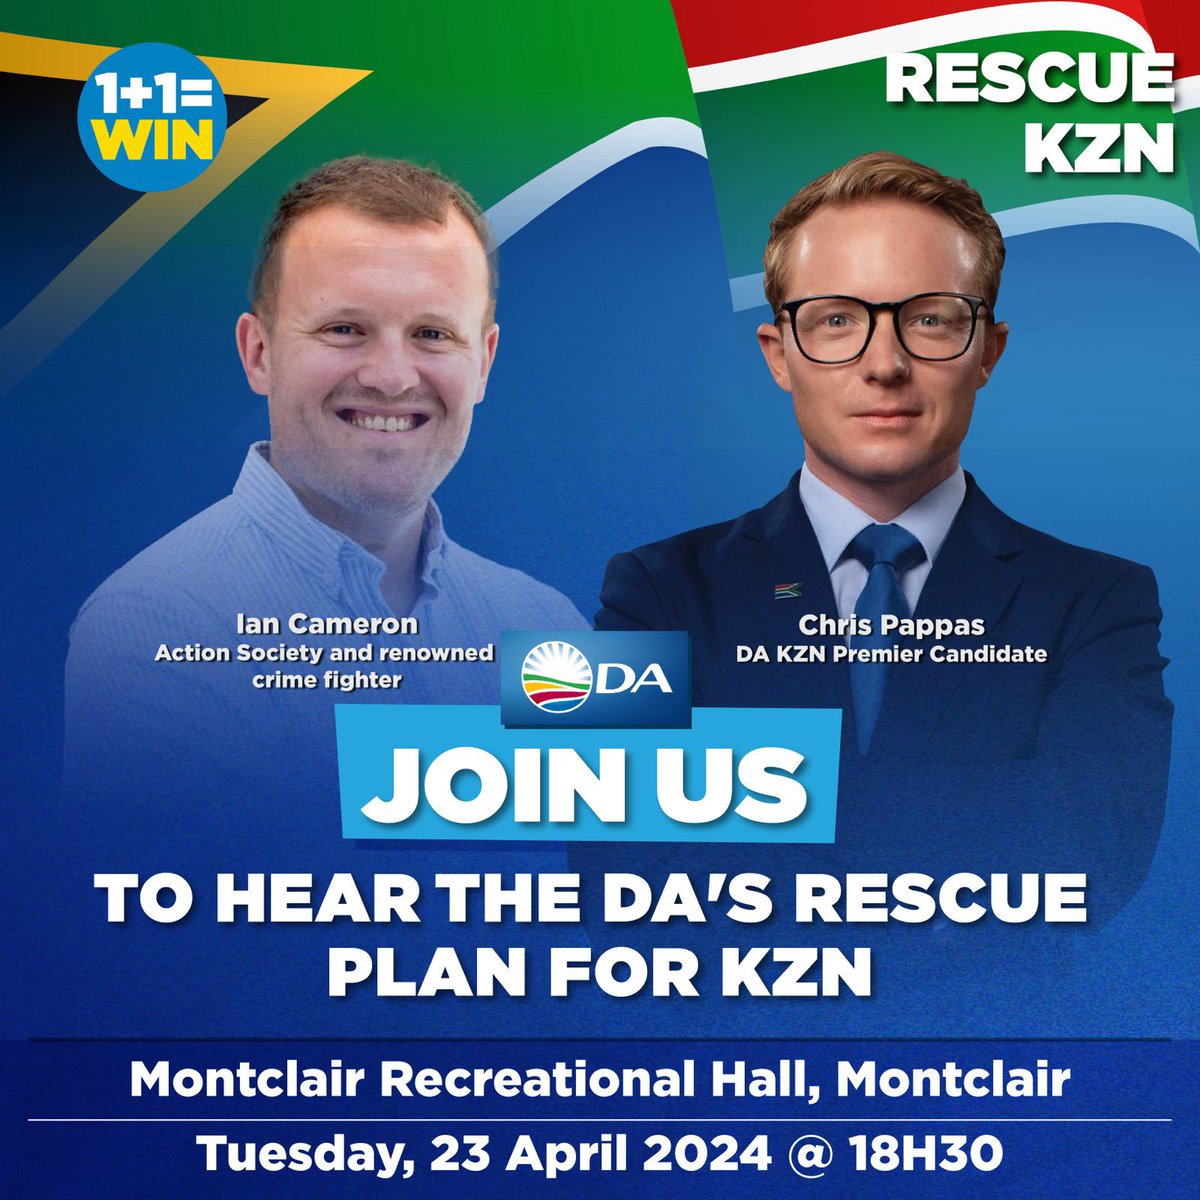 Tomorrow, renowned crime fighter @IanCameron23 will be joining DA KZN Premier Candidate, Chris Pappas on the campaign trail across the province. Looking forward to him helping us #RescueSA and #RescueKZN!